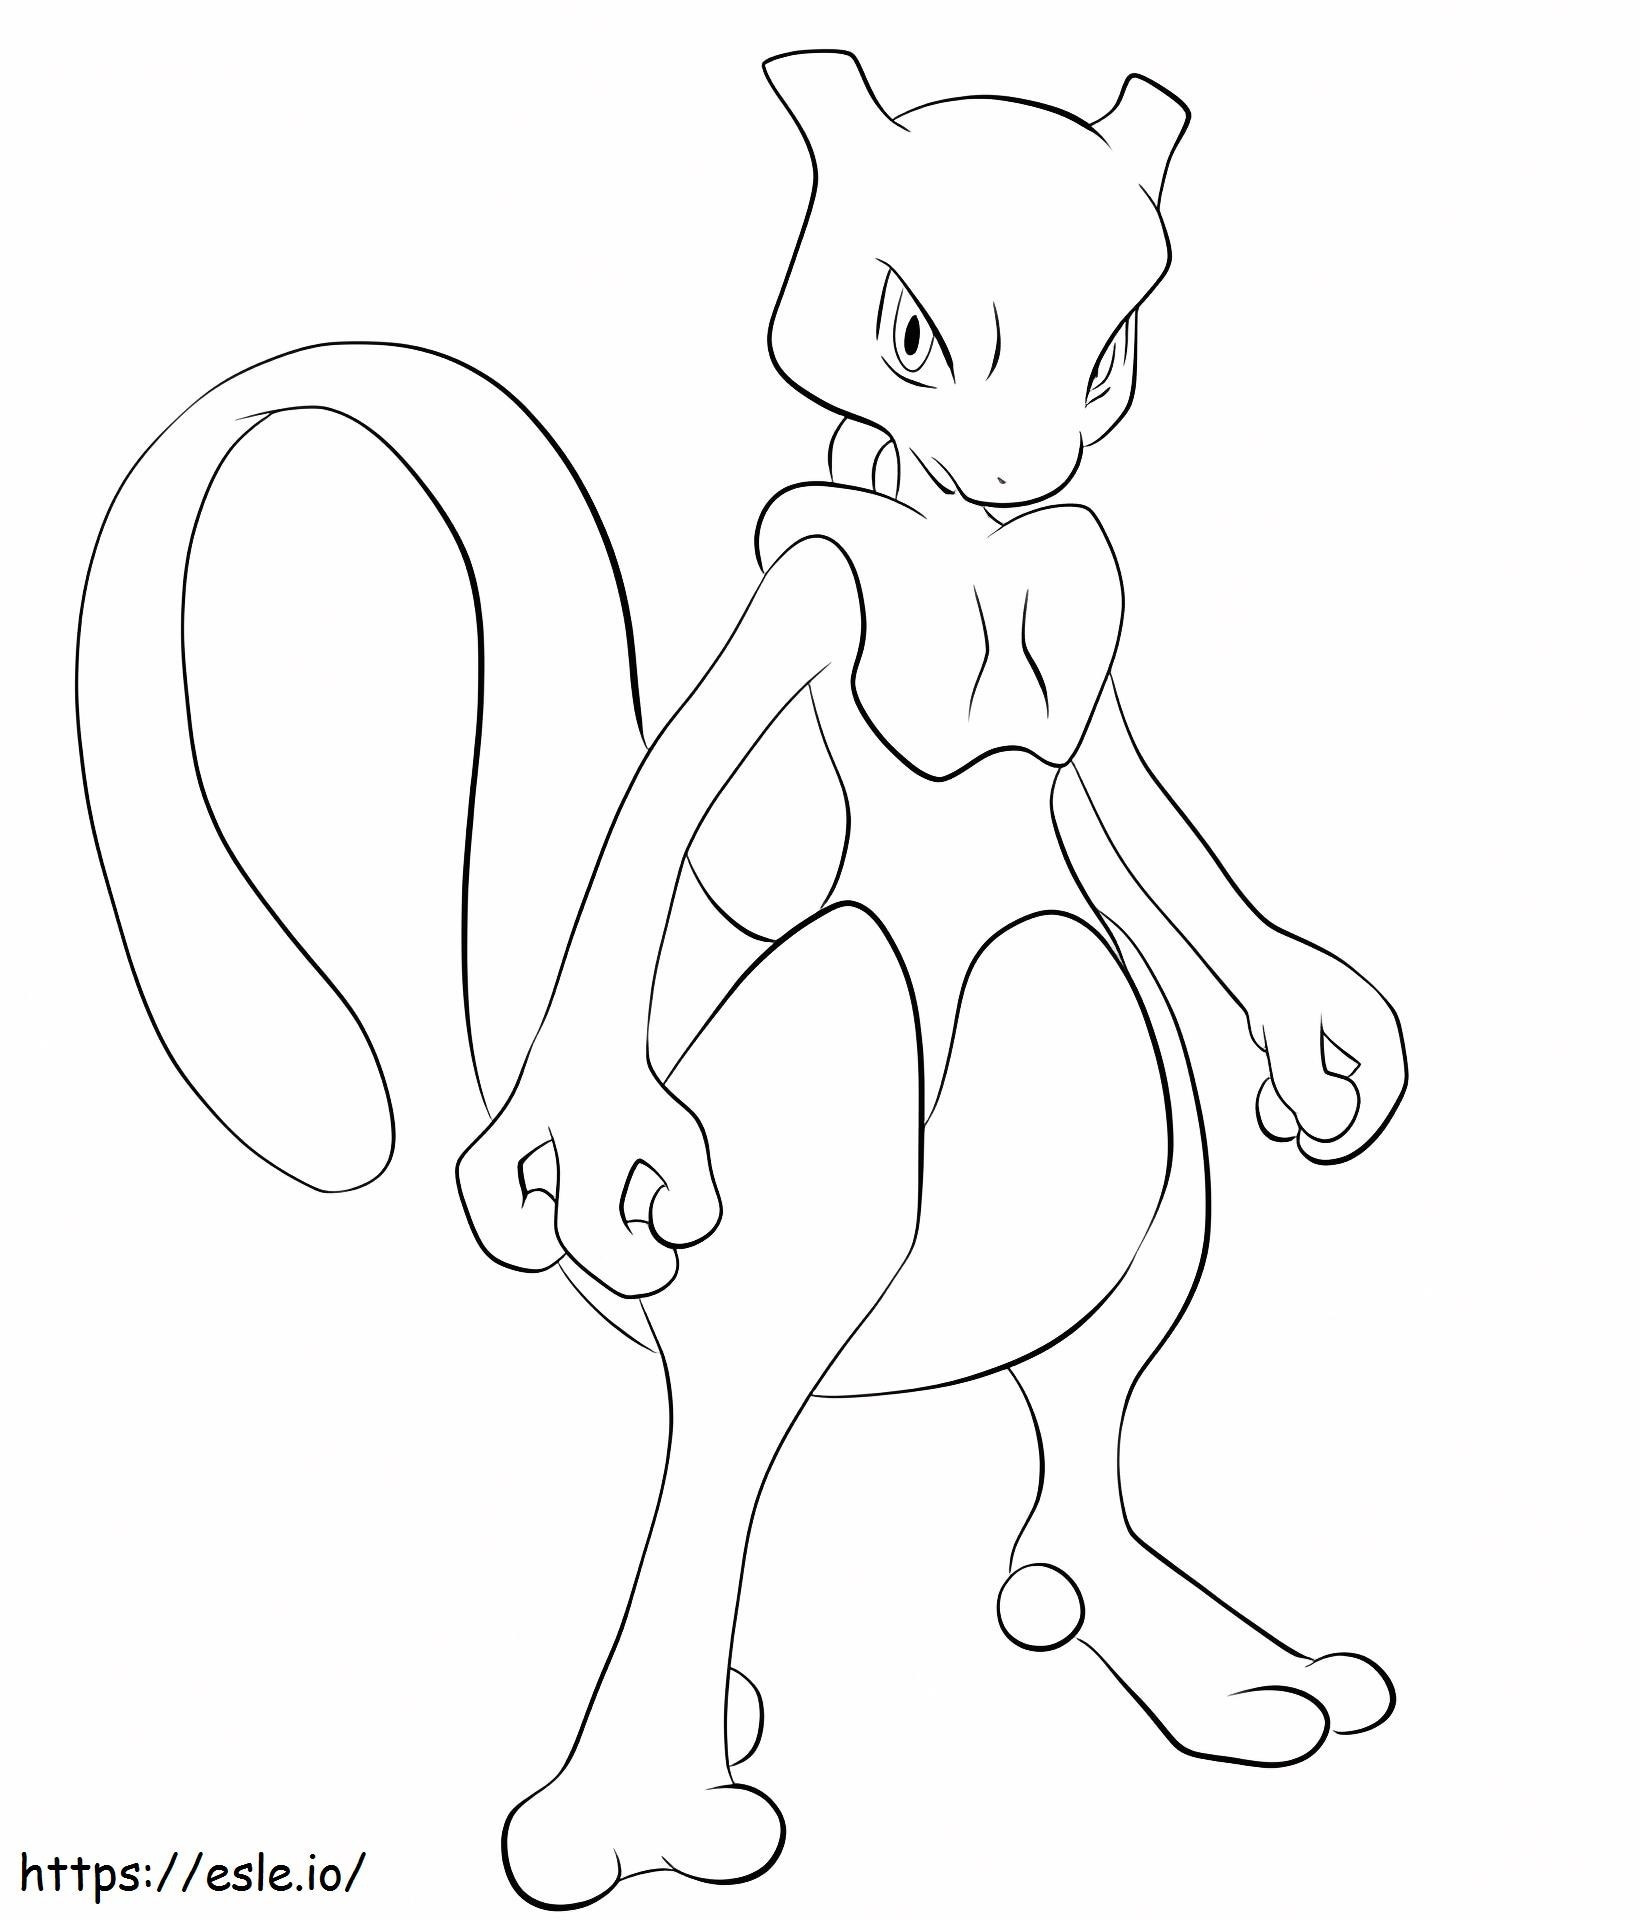 150 Mewtwo_A4 coloring page